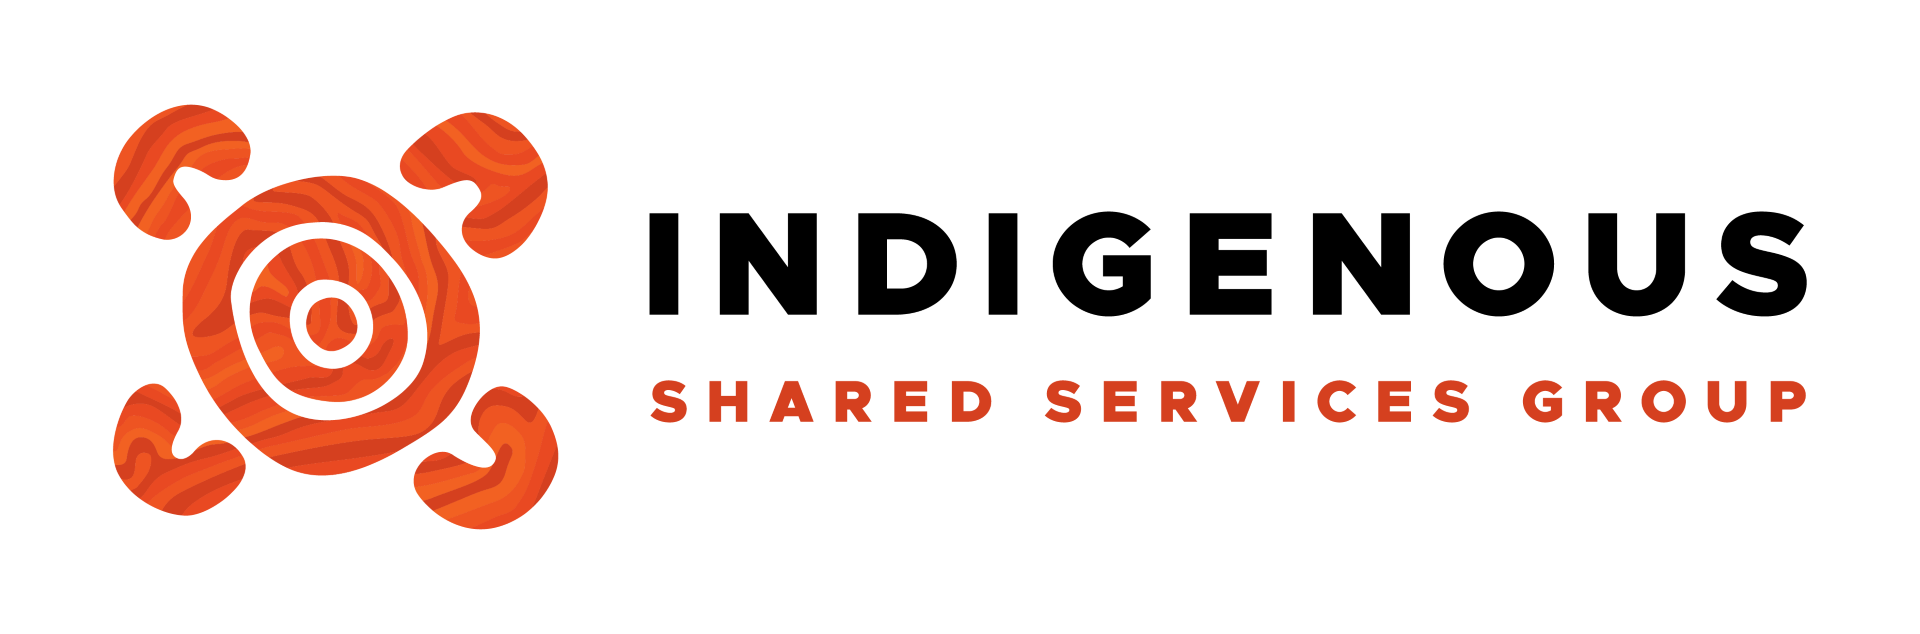 Indigenous Shared Services Group